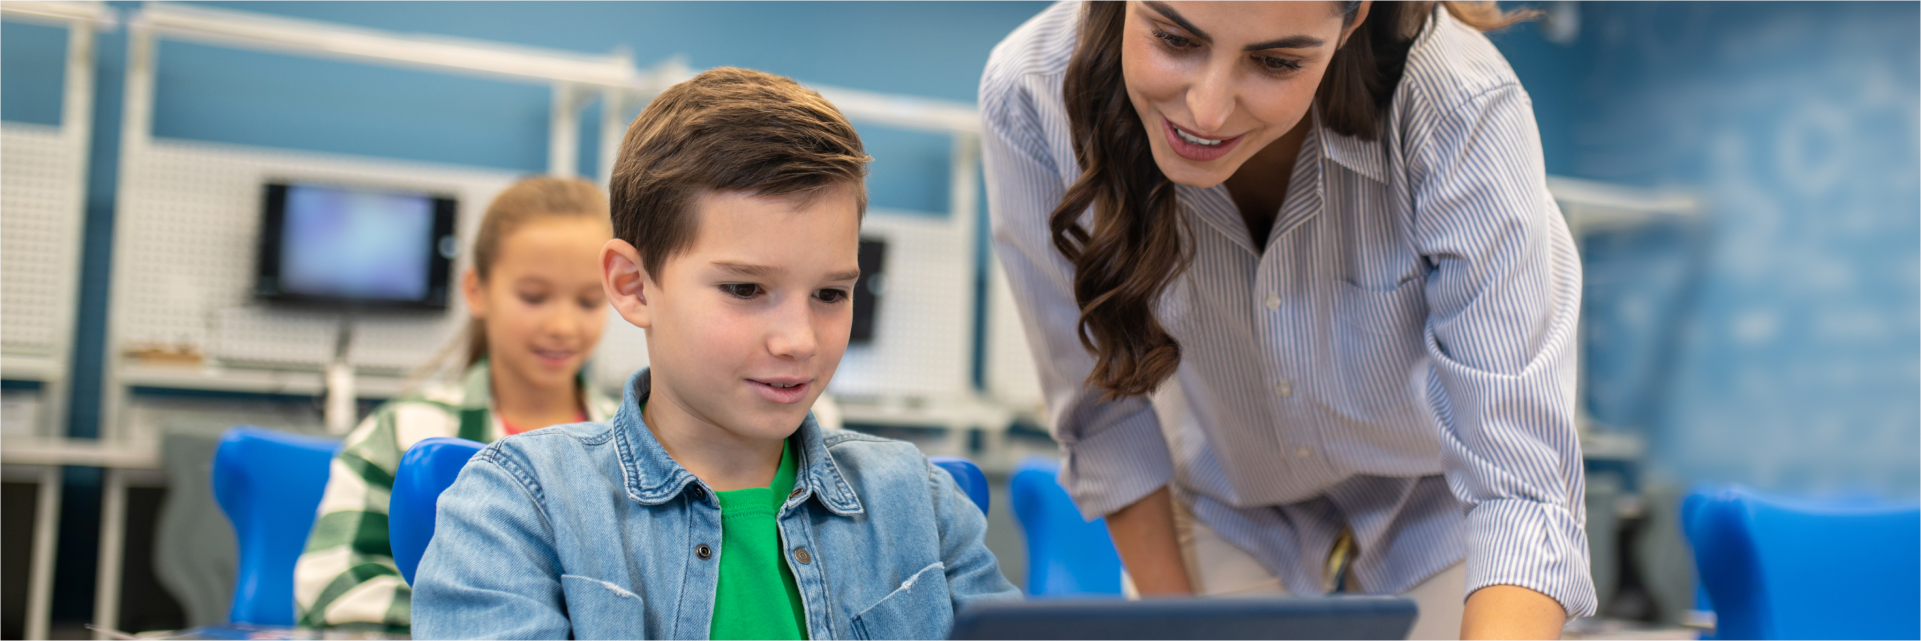 Enhancing learning experience with a child-friendly platform